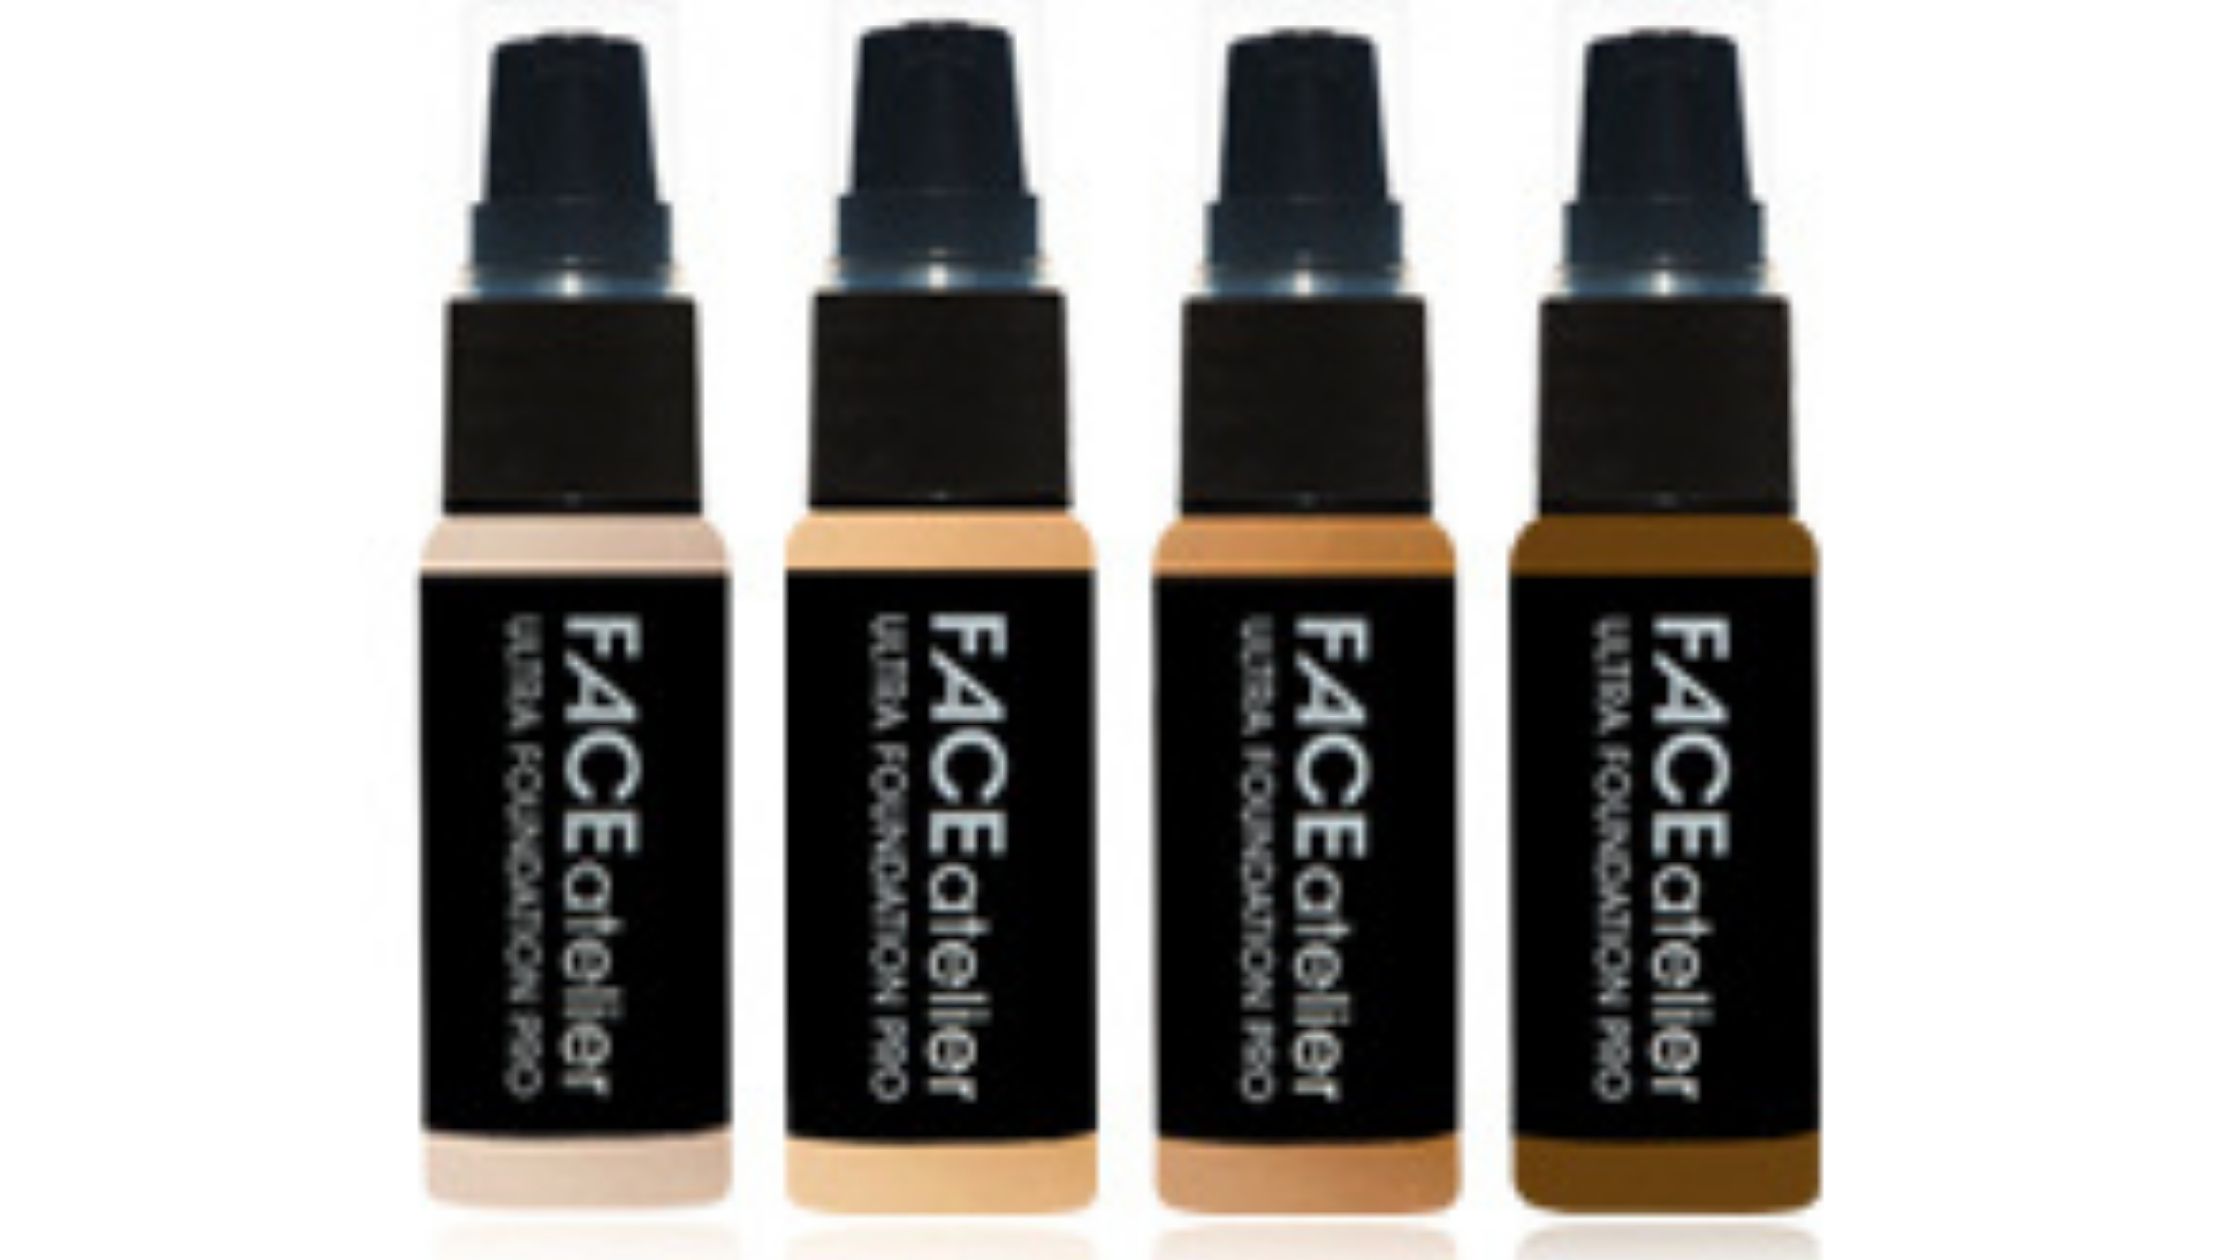 face atelier foundation Cruelty-free and vegan foundations